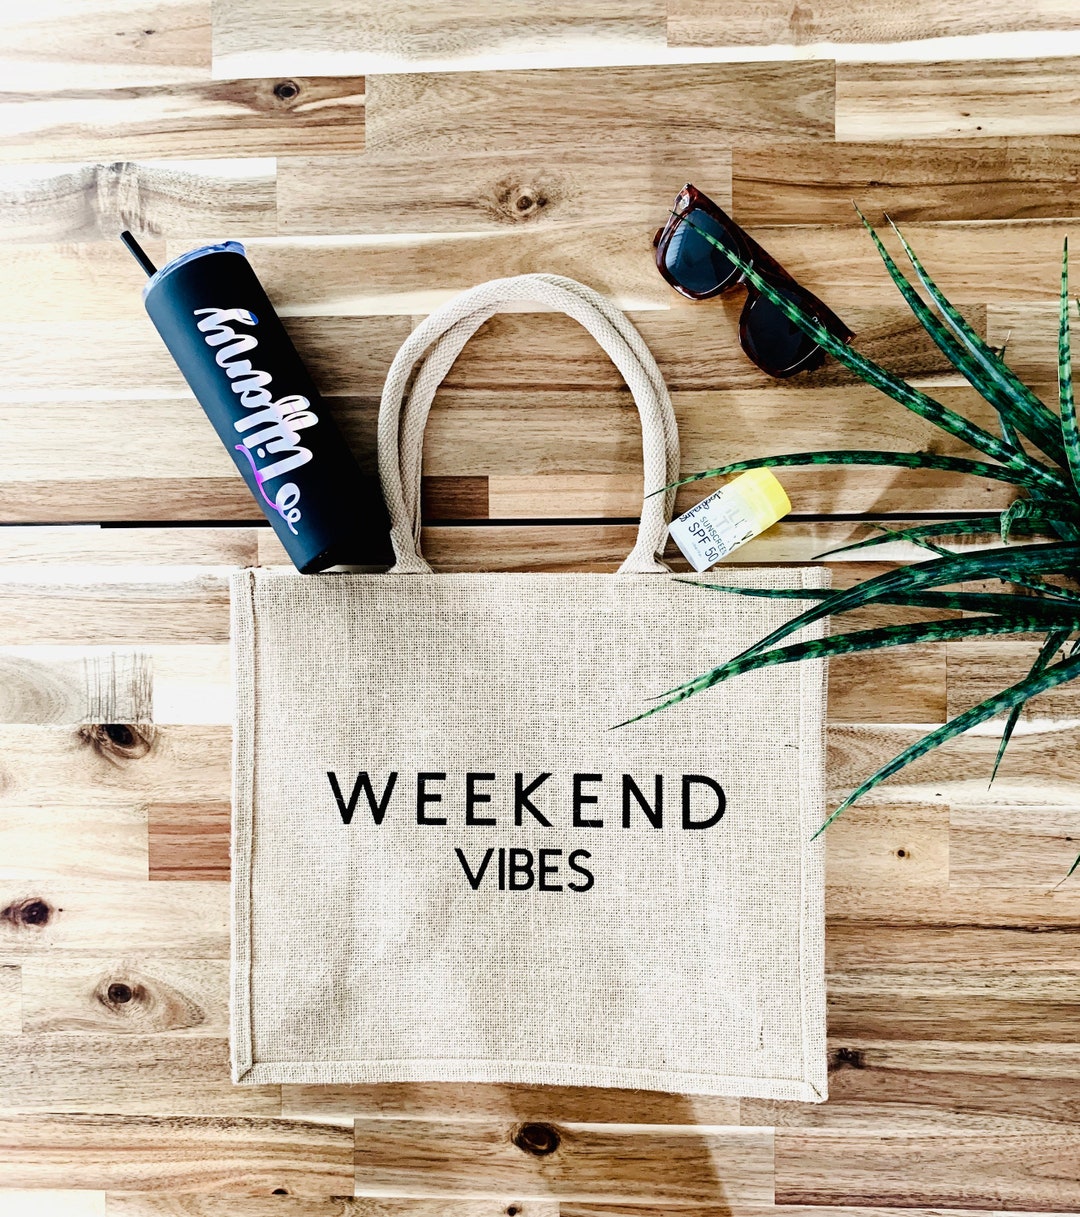 Weekend Vibes Jute Burlap Beach Bag Gift Ideas for a Girls image picture